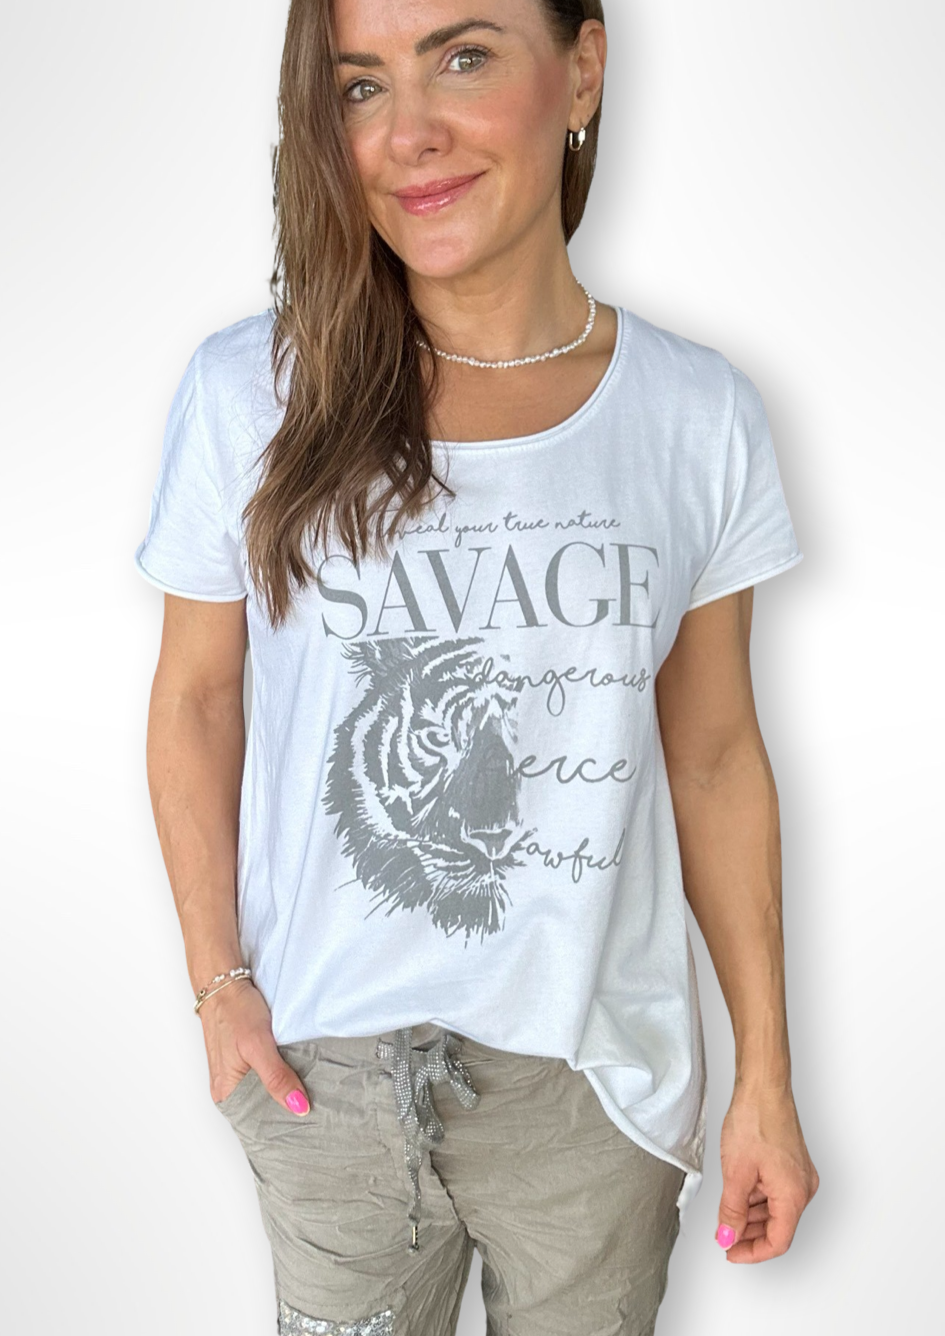 Fierce Hi Lo Tee - White, by Amici Elevate your casual wardrobe with the Fierce Hi Lo Tee.  This lightweight tee is made from 100% cotton and features fierce design, and hi lo hem, making it the perfect weekend tee with jeans, denim shorts or our fab Milanese Jogger Pants!